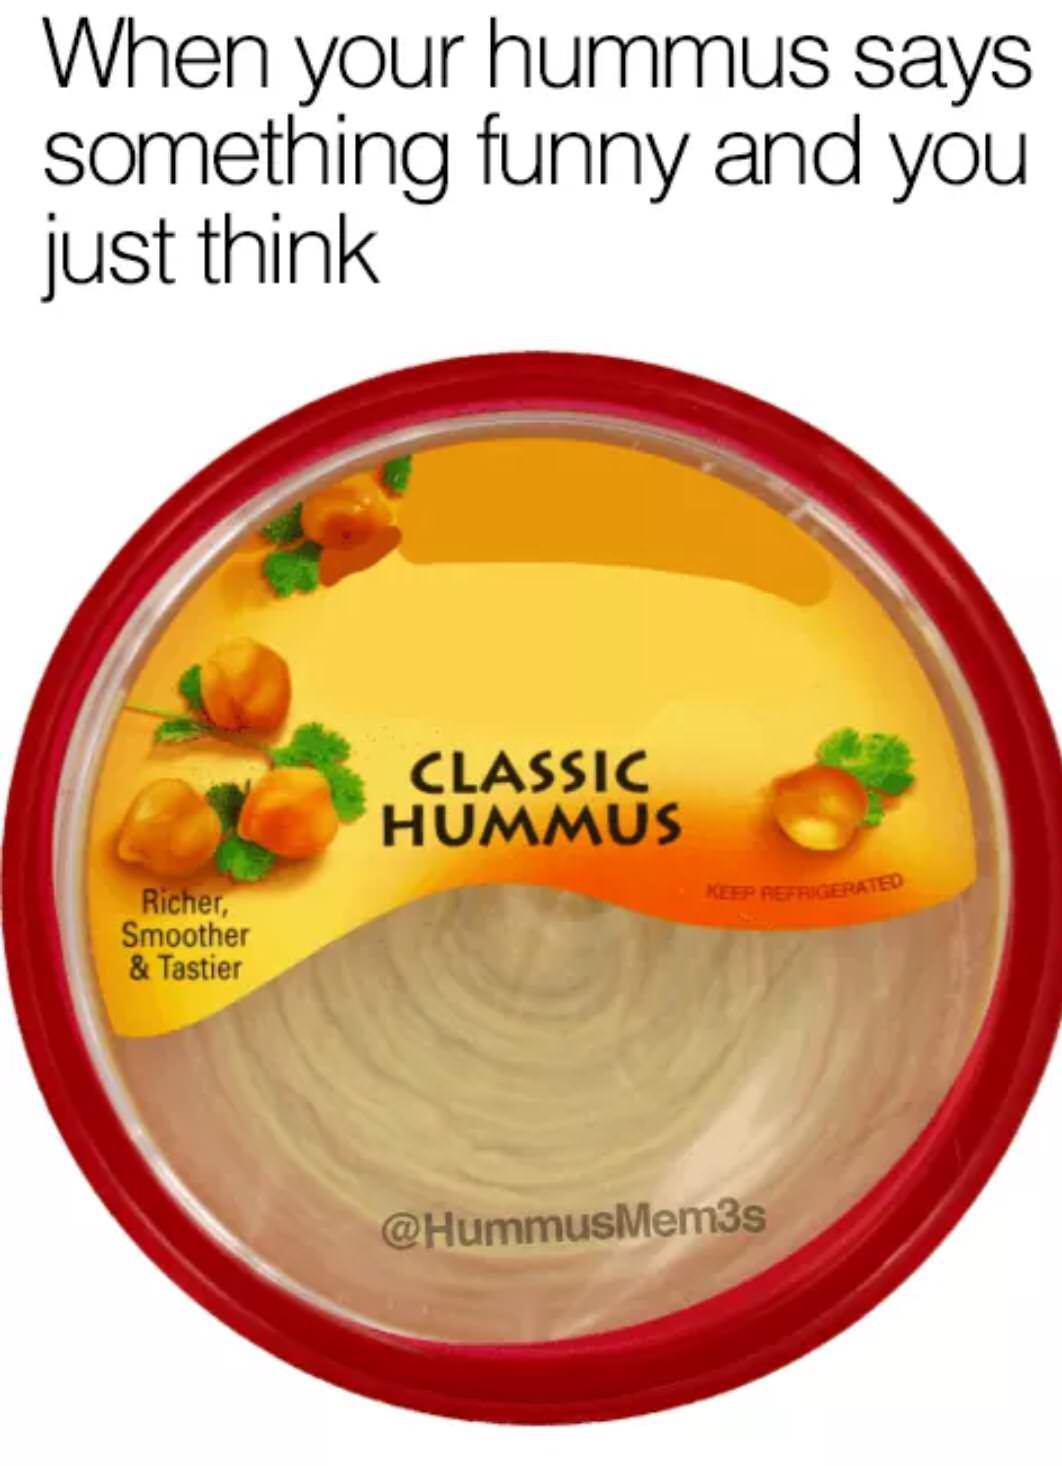 funny hummus memes - When your hummus says something funny and you just think Classic Hummus Keep Refrigerated Richer, Smoother & Tastier